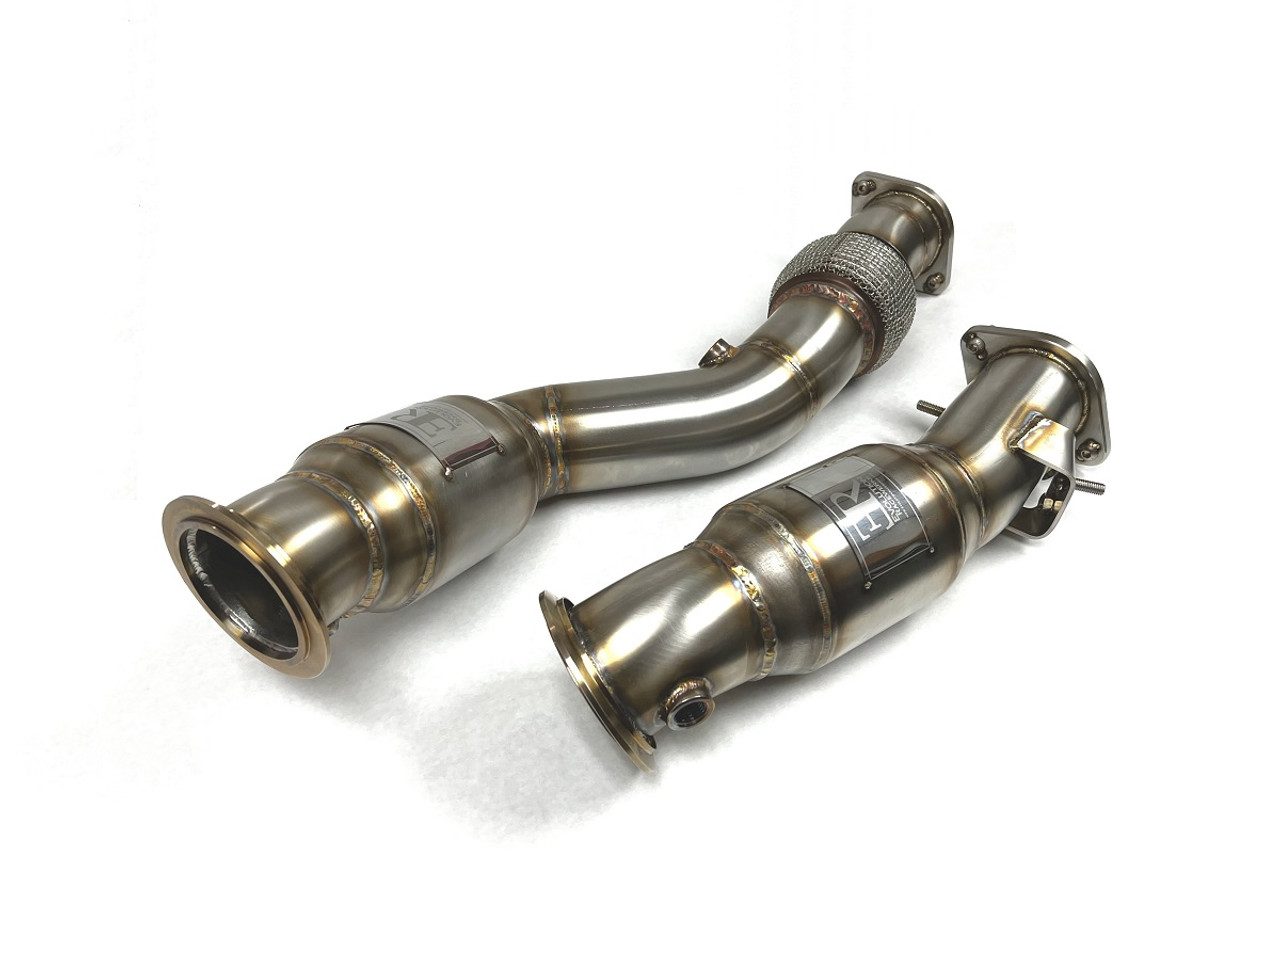 Is High Flow Downpipe Worth It?